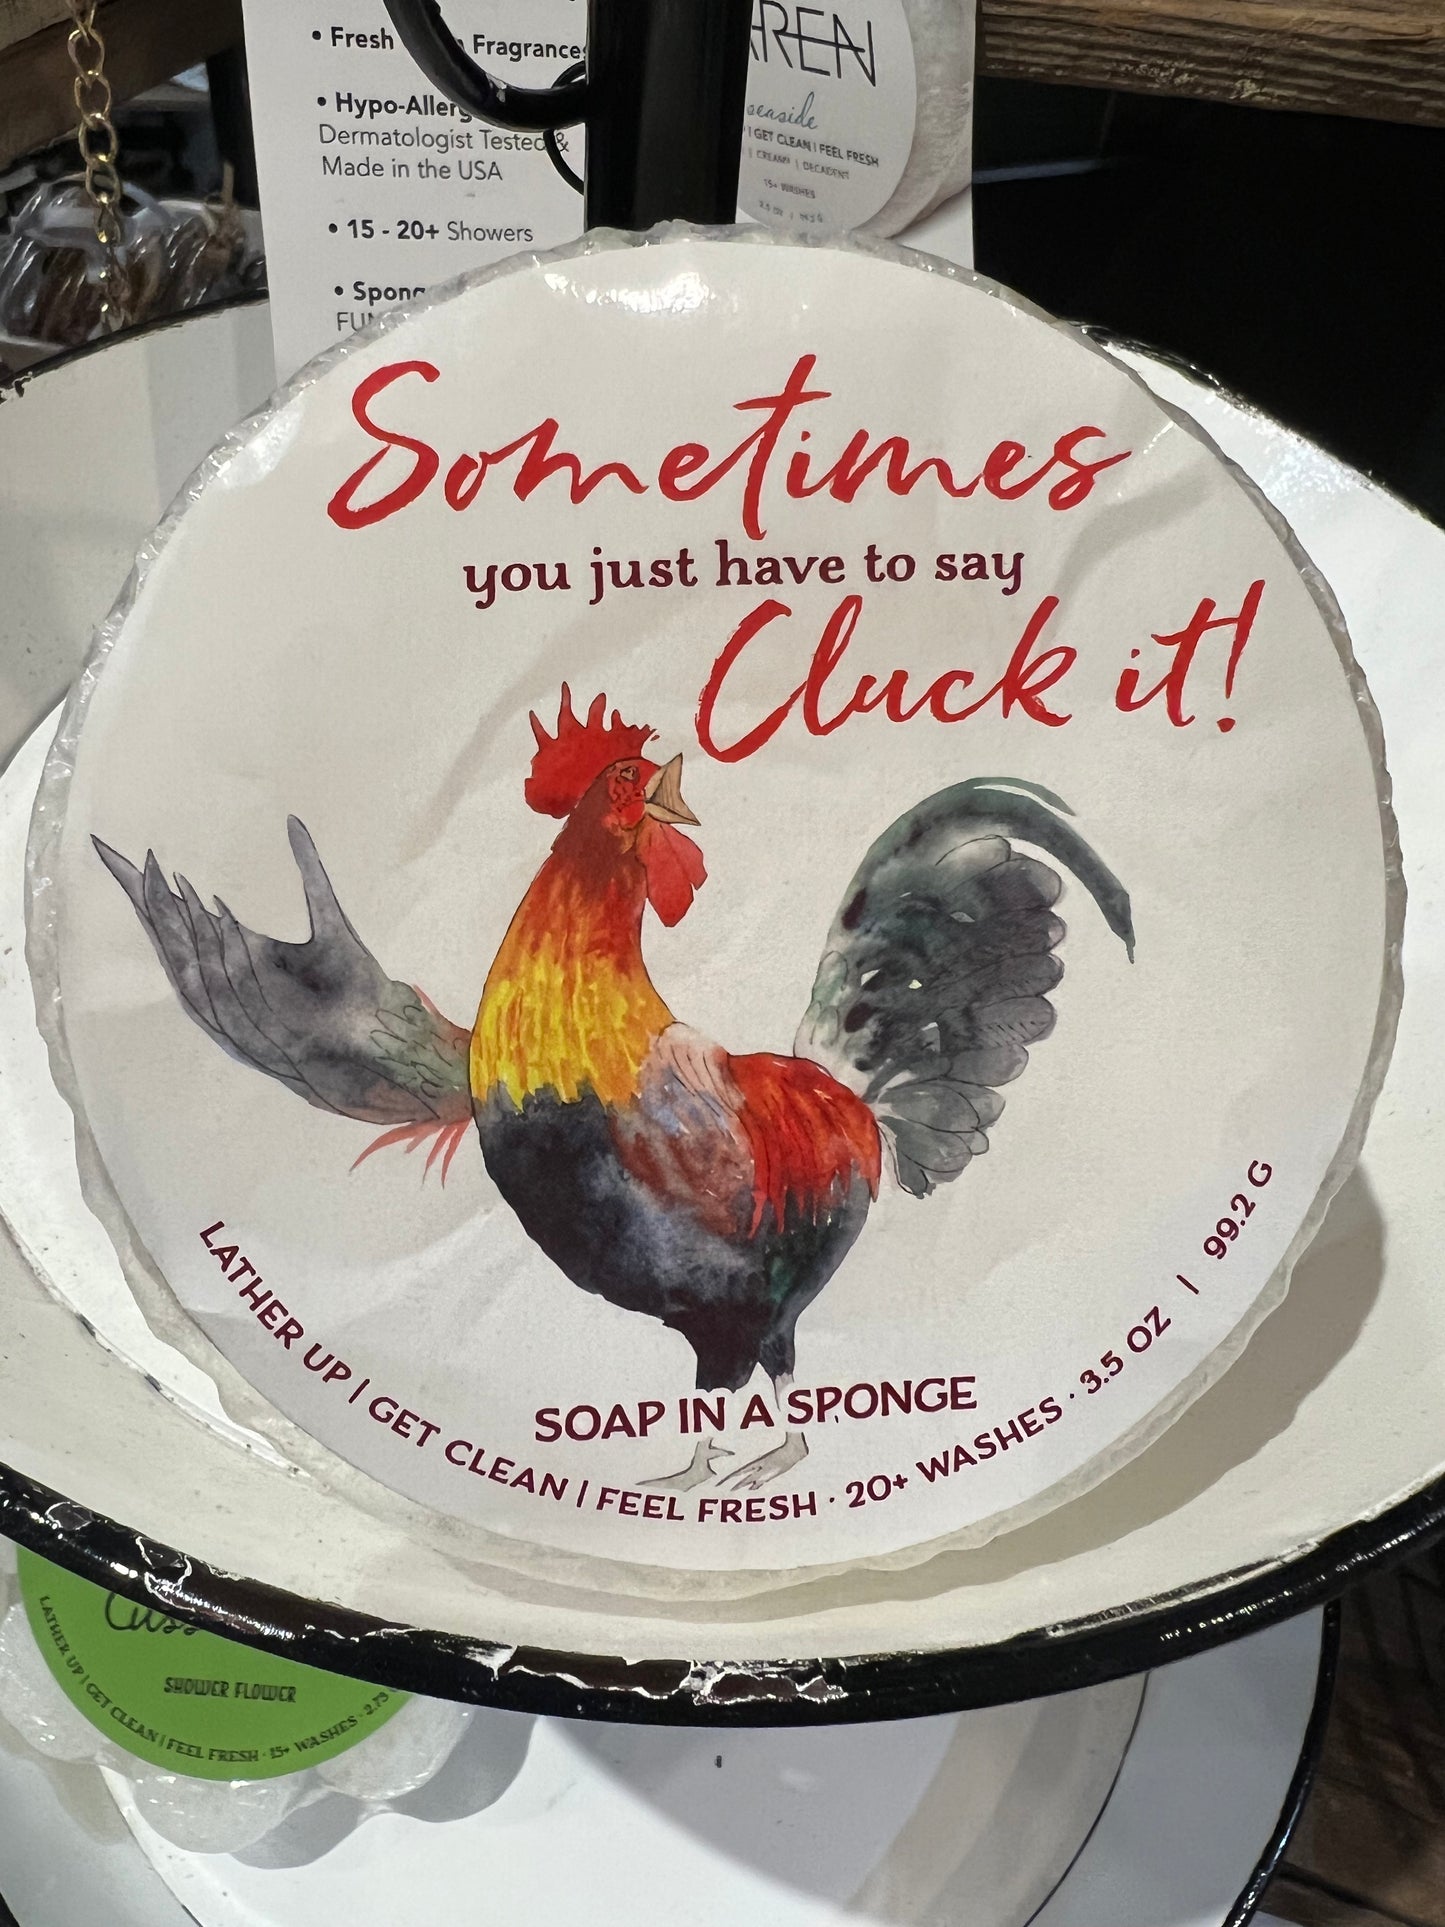 Caren "Sometimes you just have to say cluck it" soap sponge. White and round.